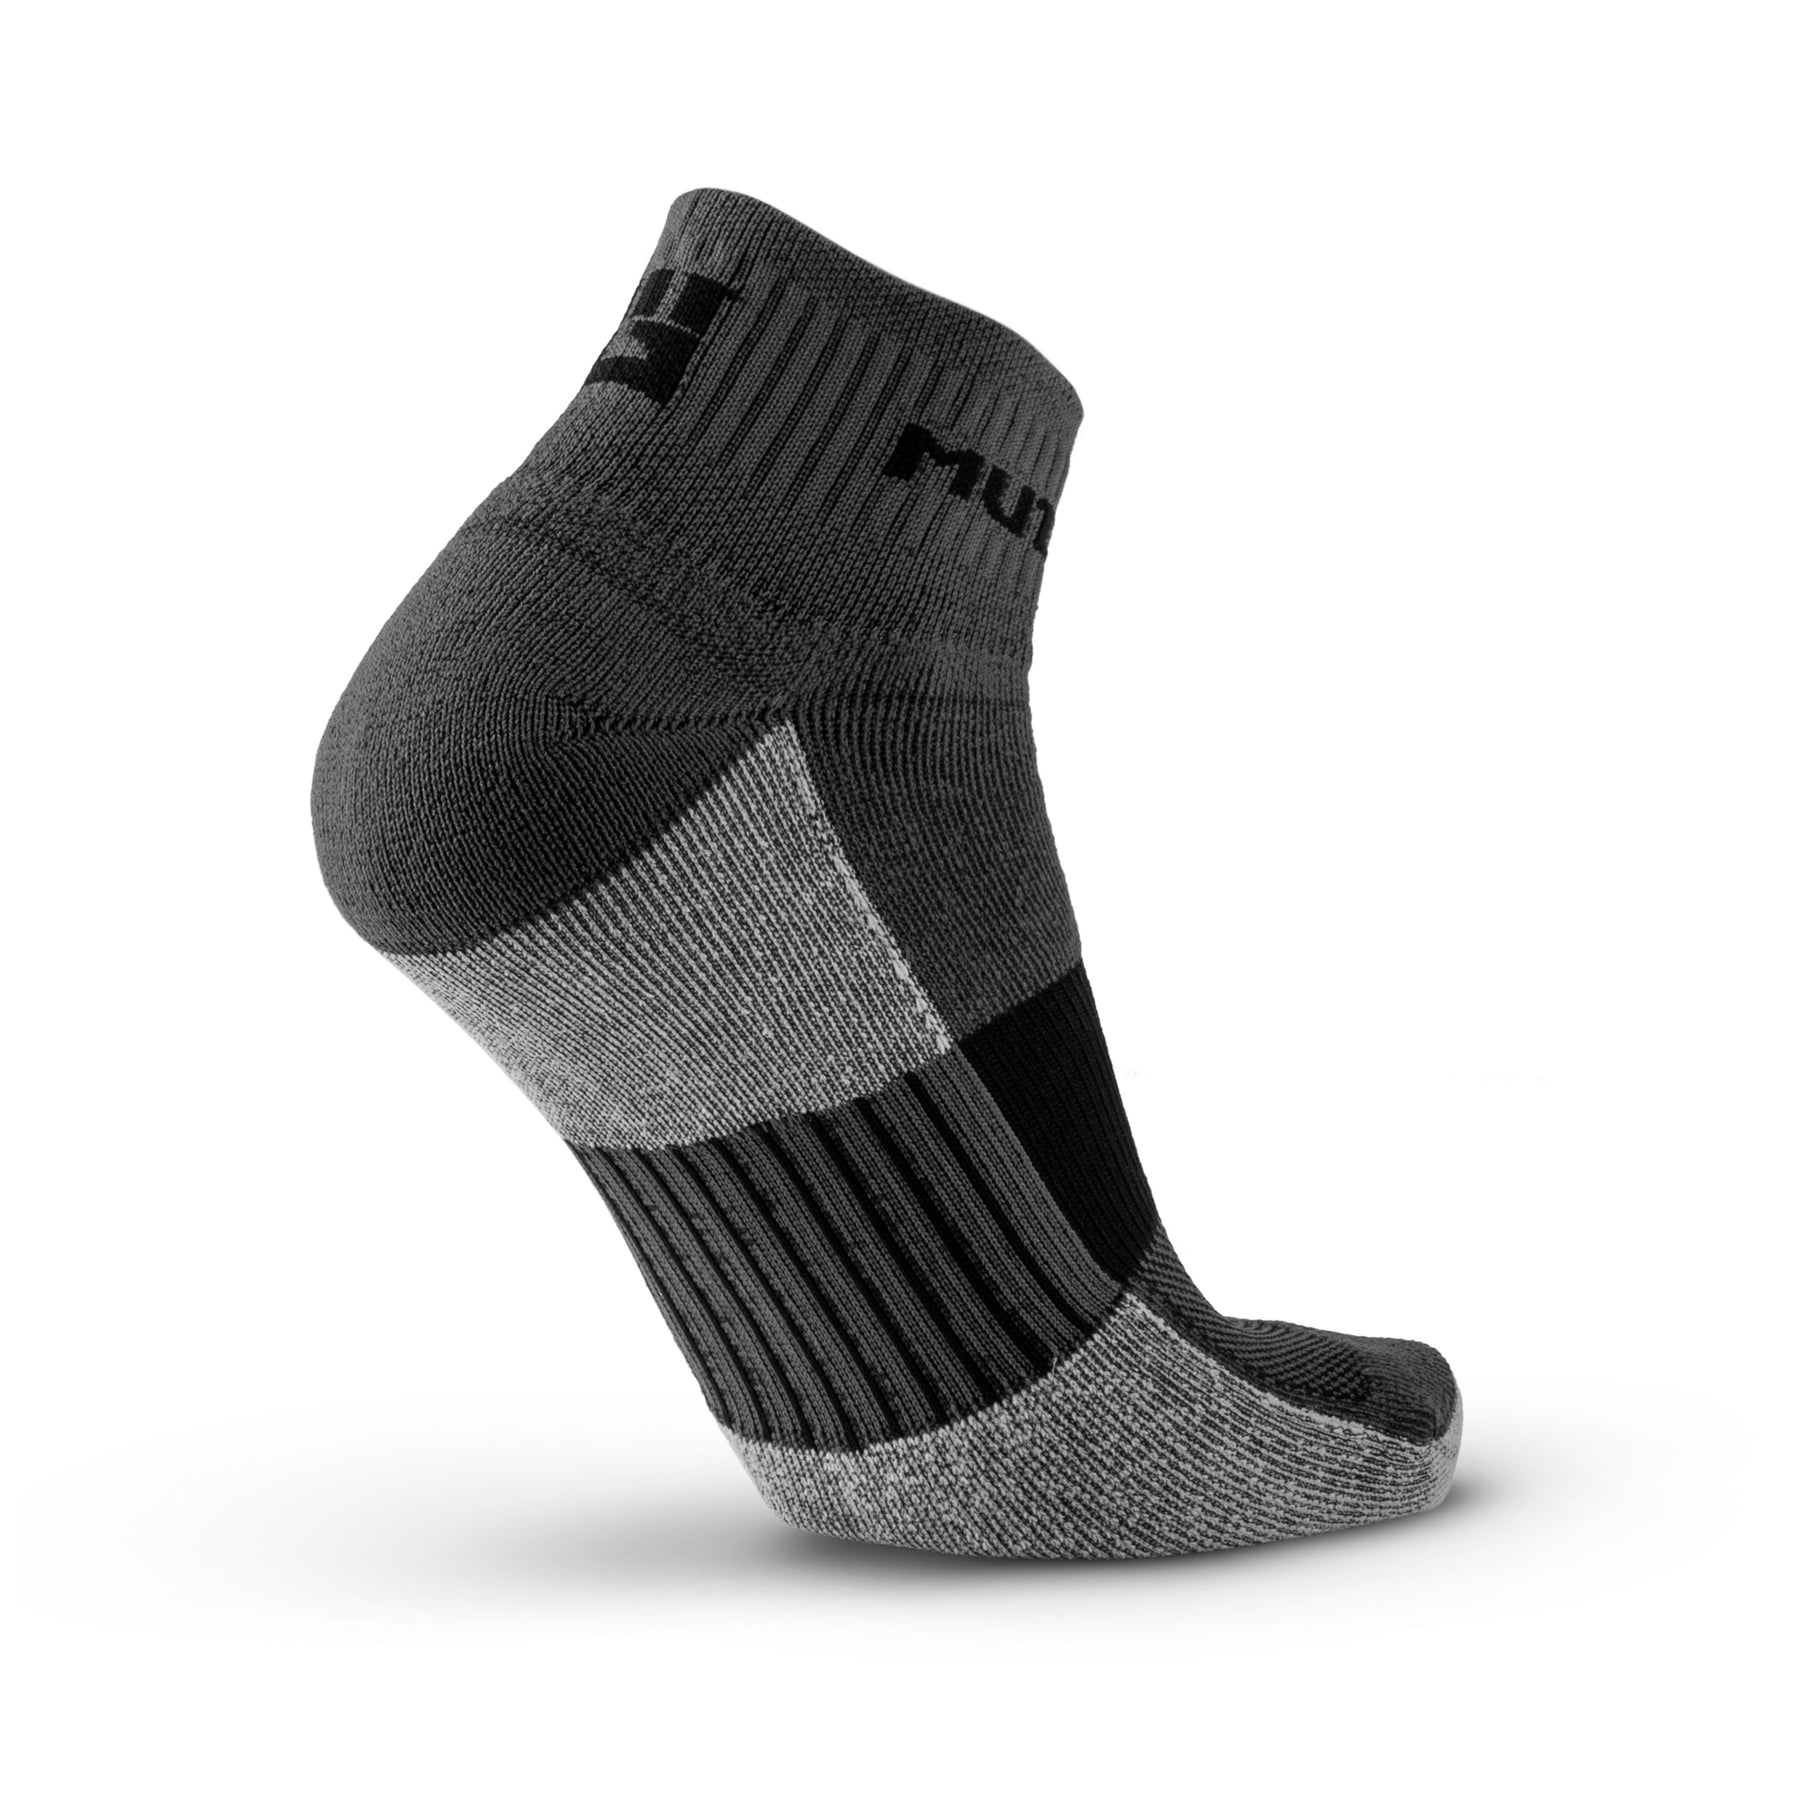 MudGear | Tough Mud Run Socks For Trail Running and Obstacle Races